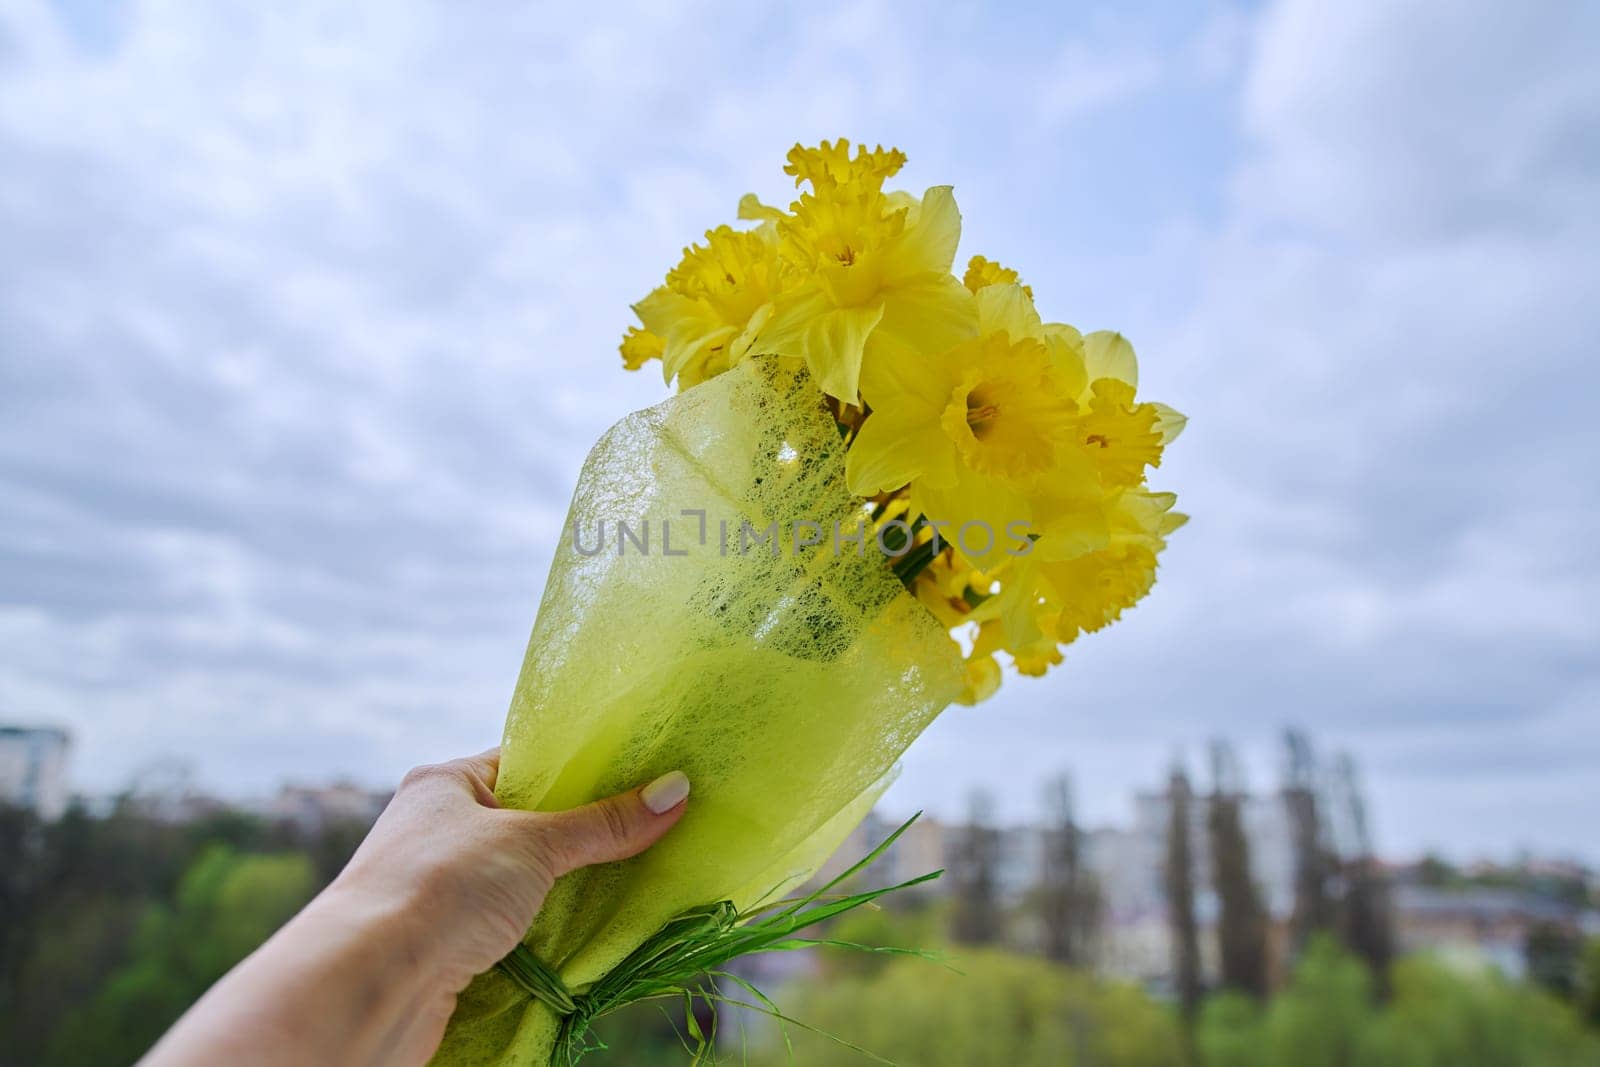 Bouquet of yellow daffodils in woman's hand against sky in clouds by VH-studio